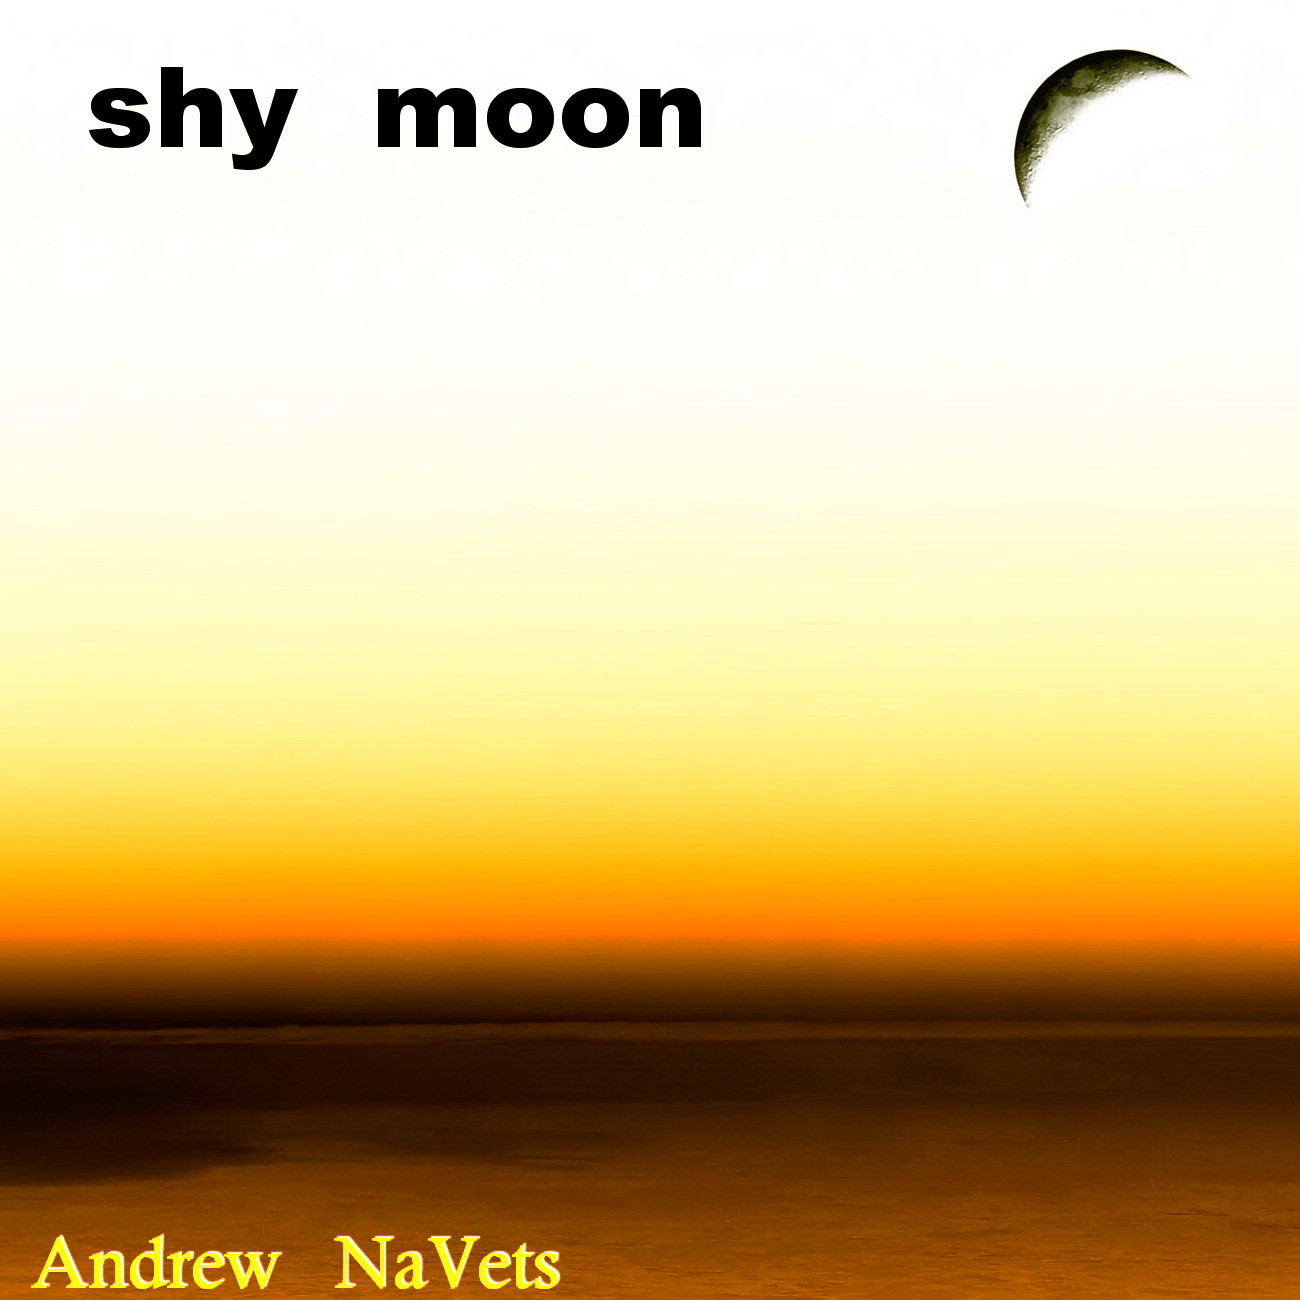 Andy moon